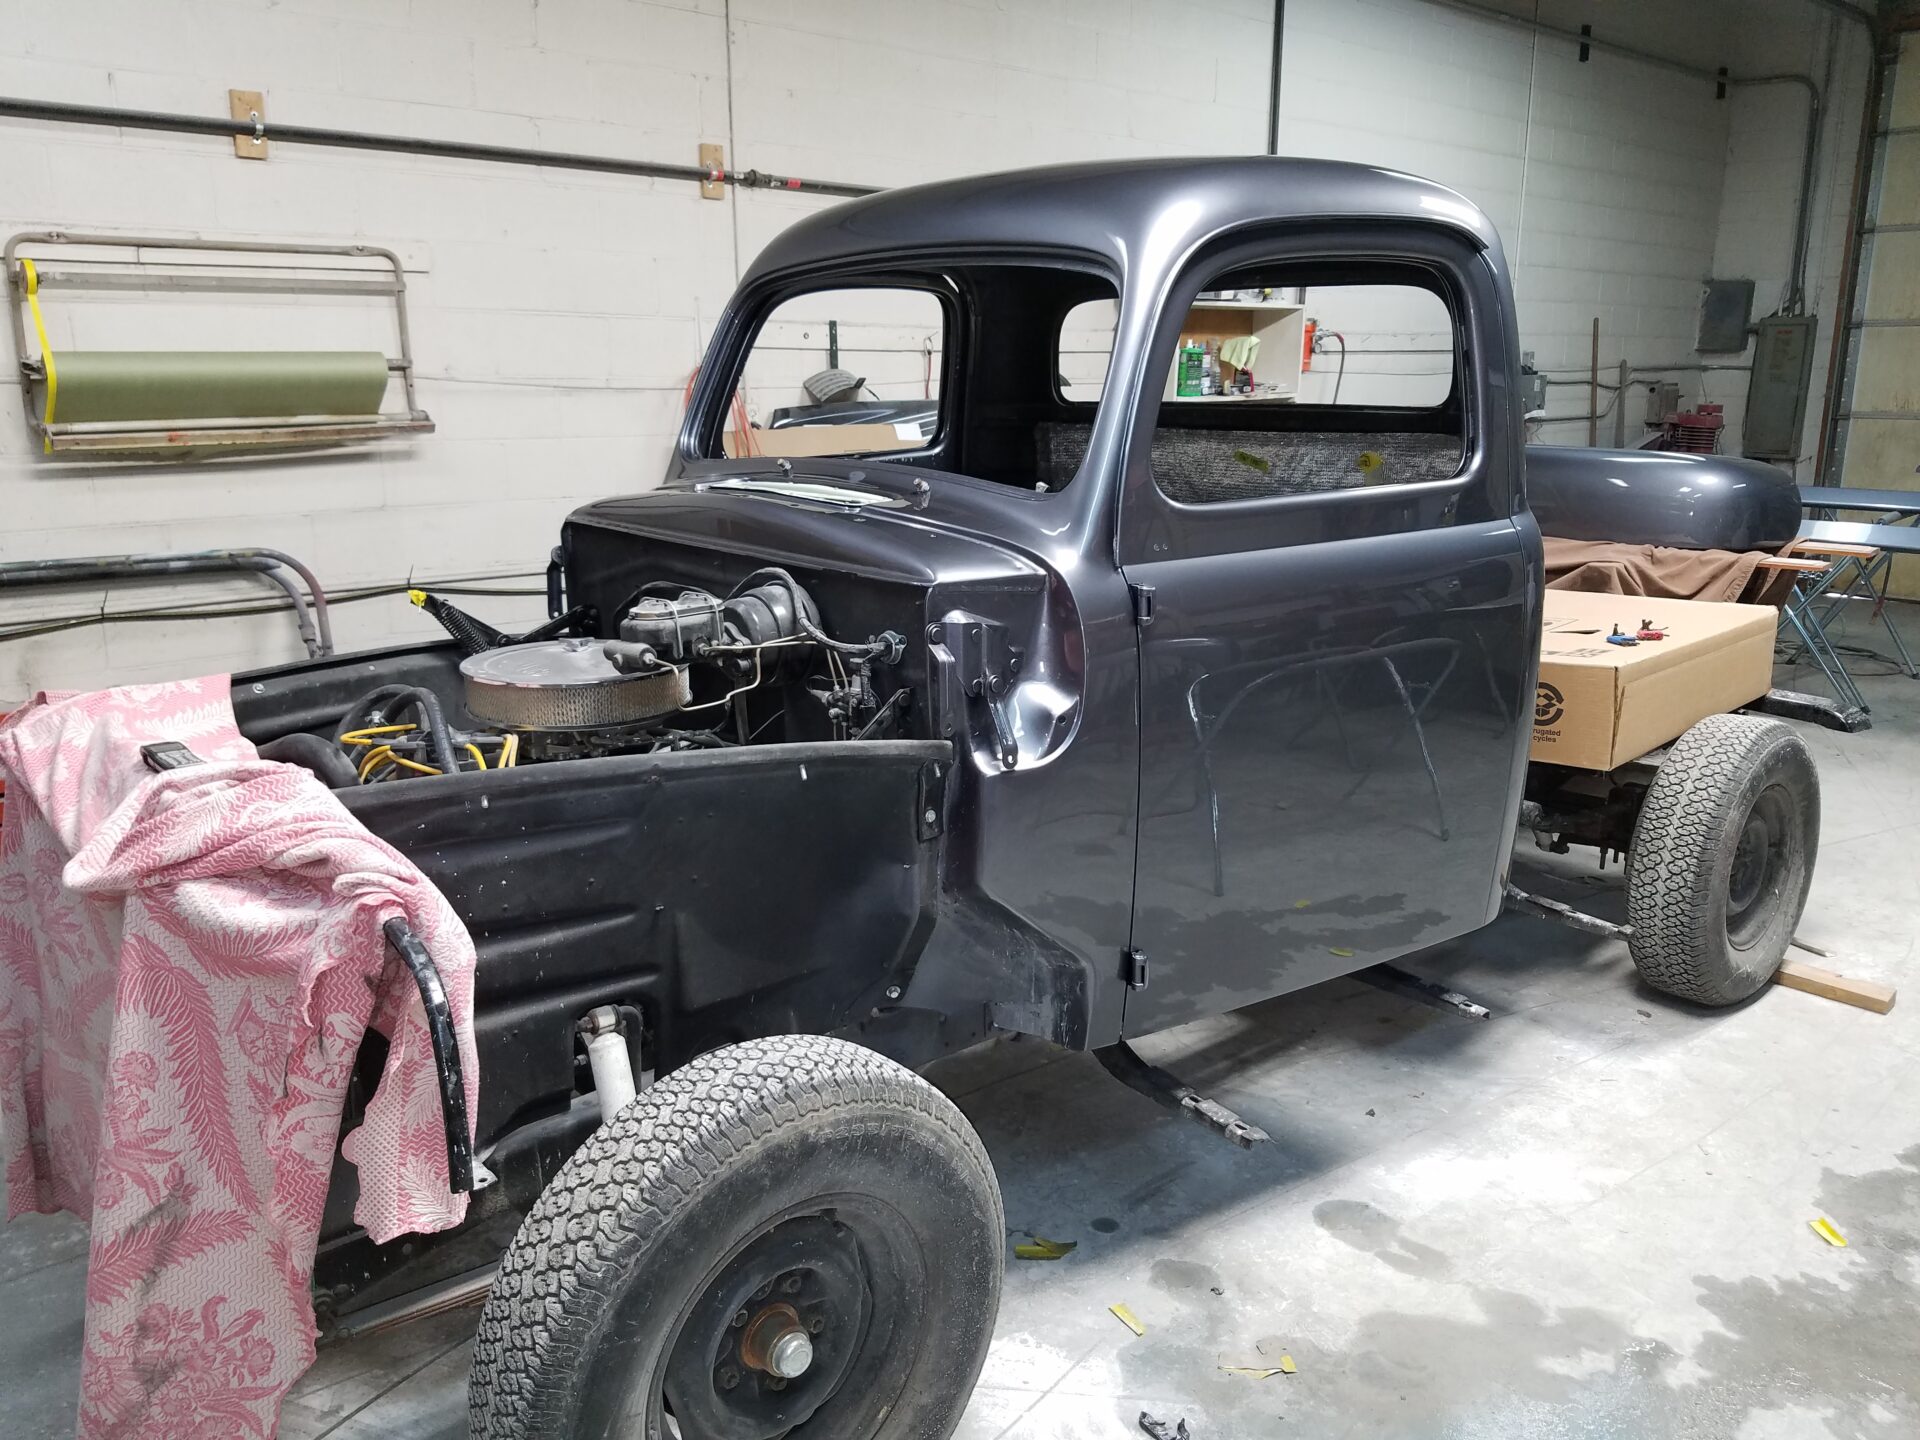 Glossed up black 1952 Ford F100 car paint